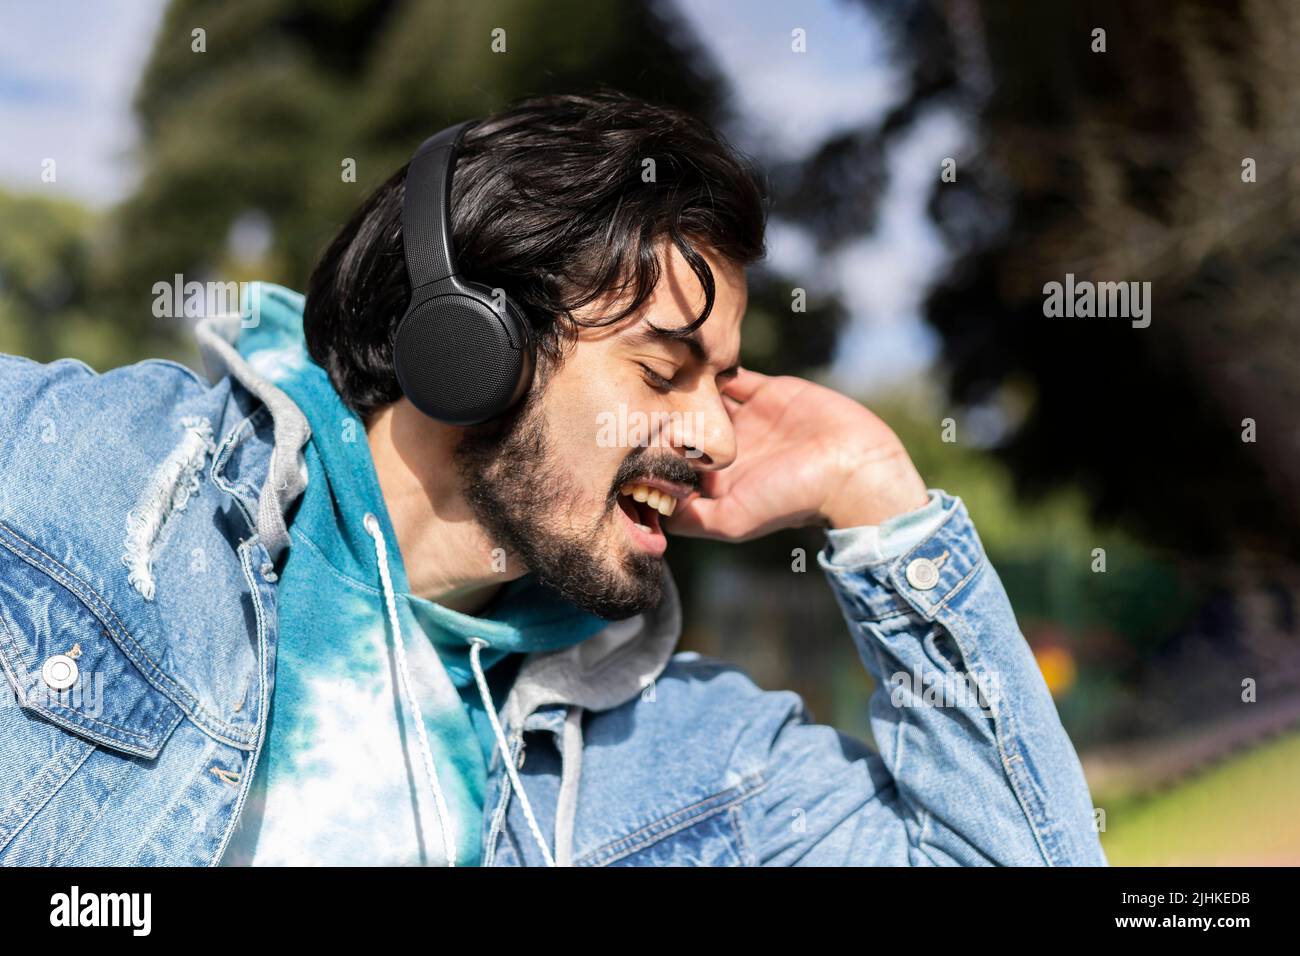 Young latin man listening to music outdoors with headphones. Expression of happiness, winning attitude. Stock Photo